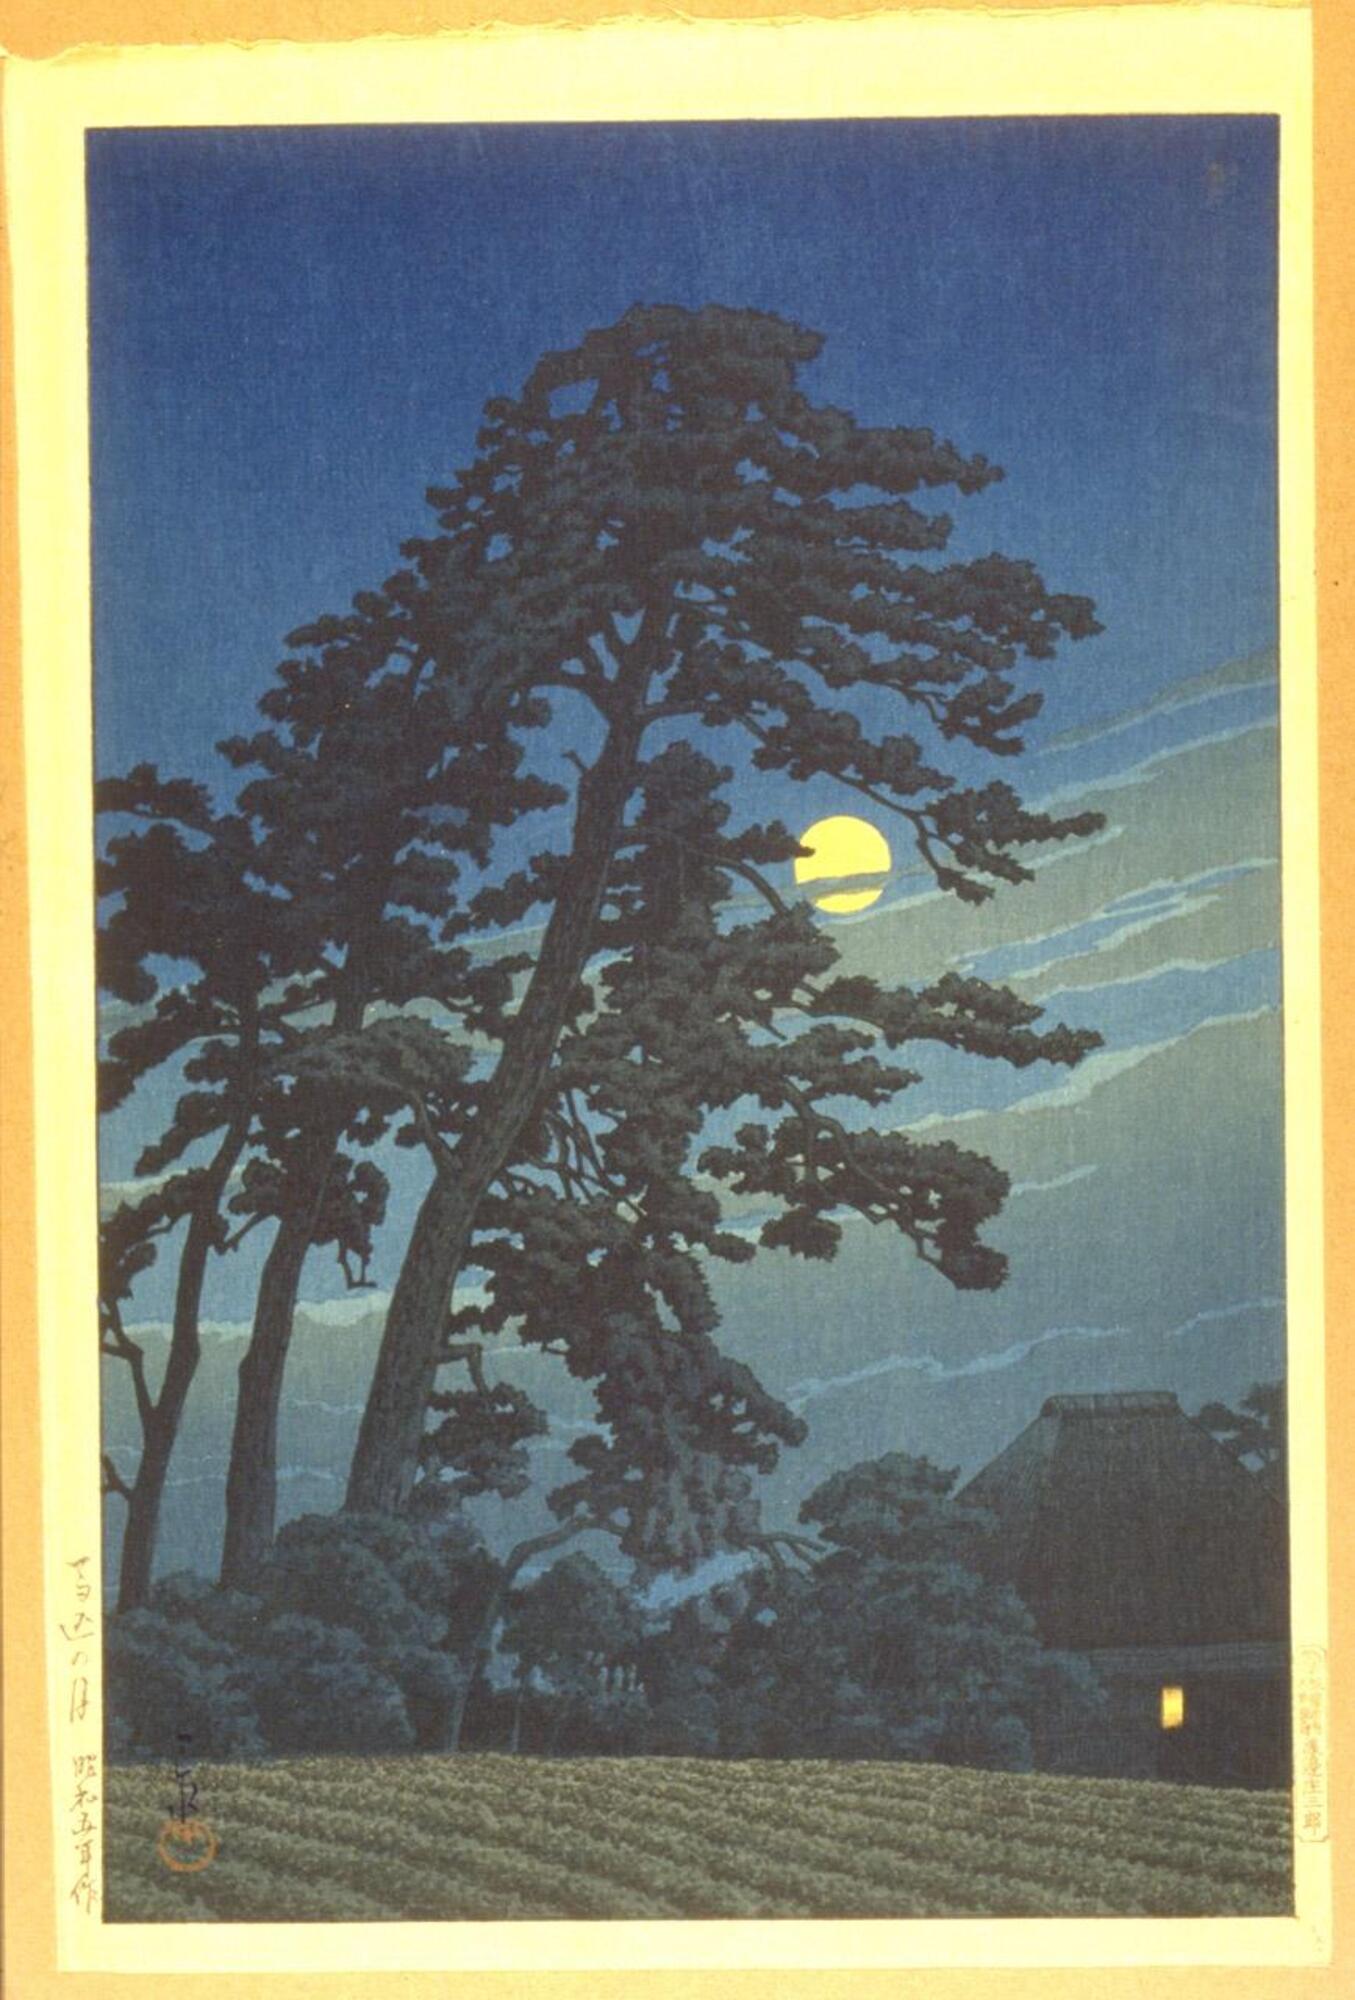 A large, dark tree looms over a field with neat rows of crops. A full moon hangs low in the sky, peeking from behind tree branches and thin gray clouds.